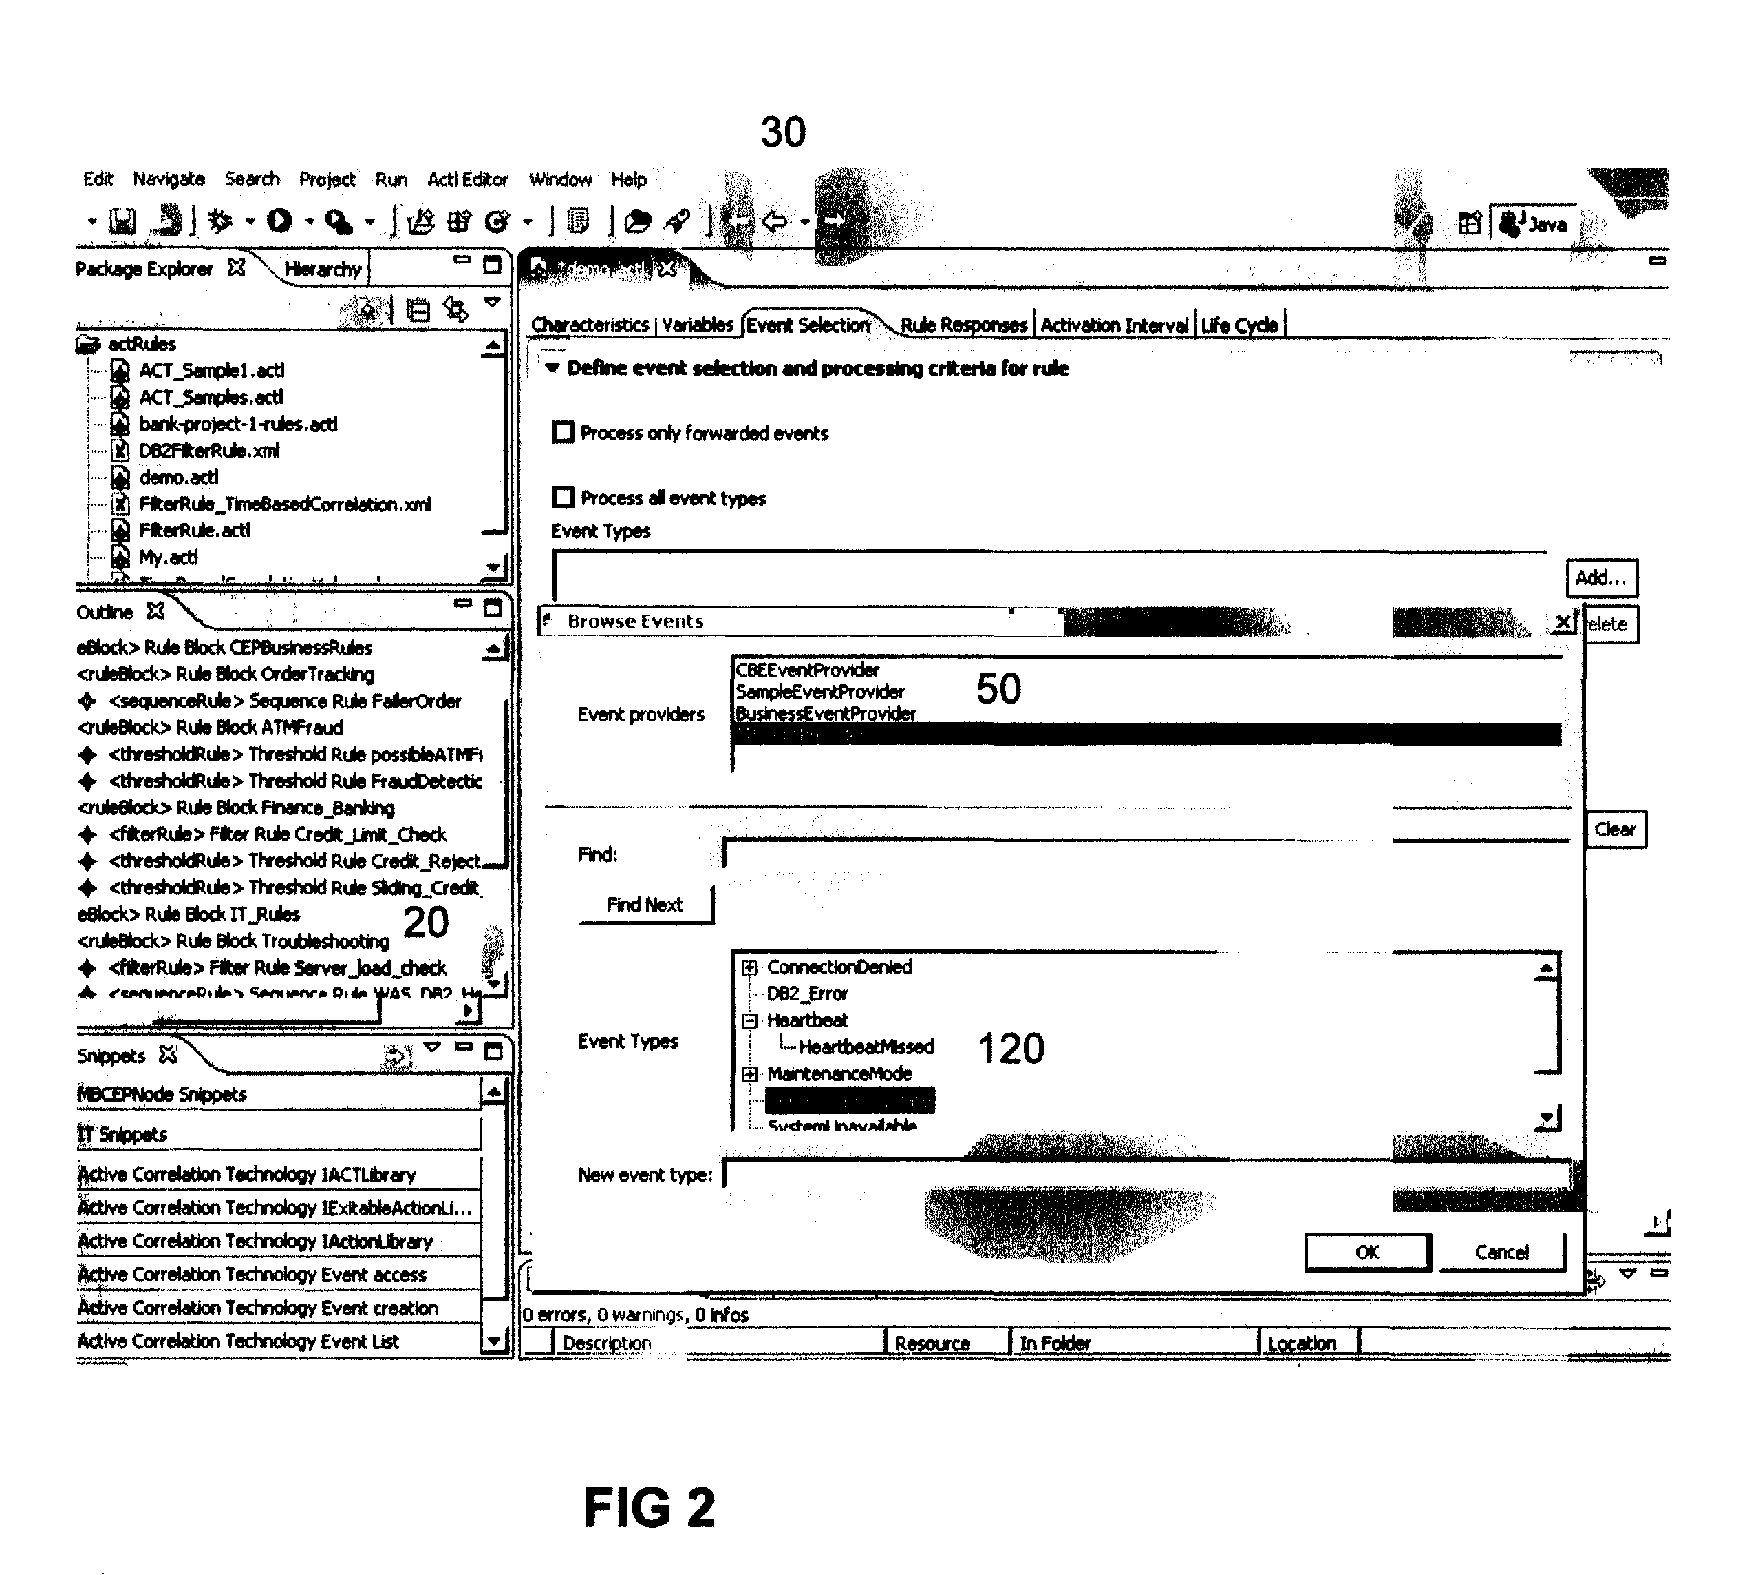 Method and system for processing multiple heterogeneous event types in a complex event processing engine